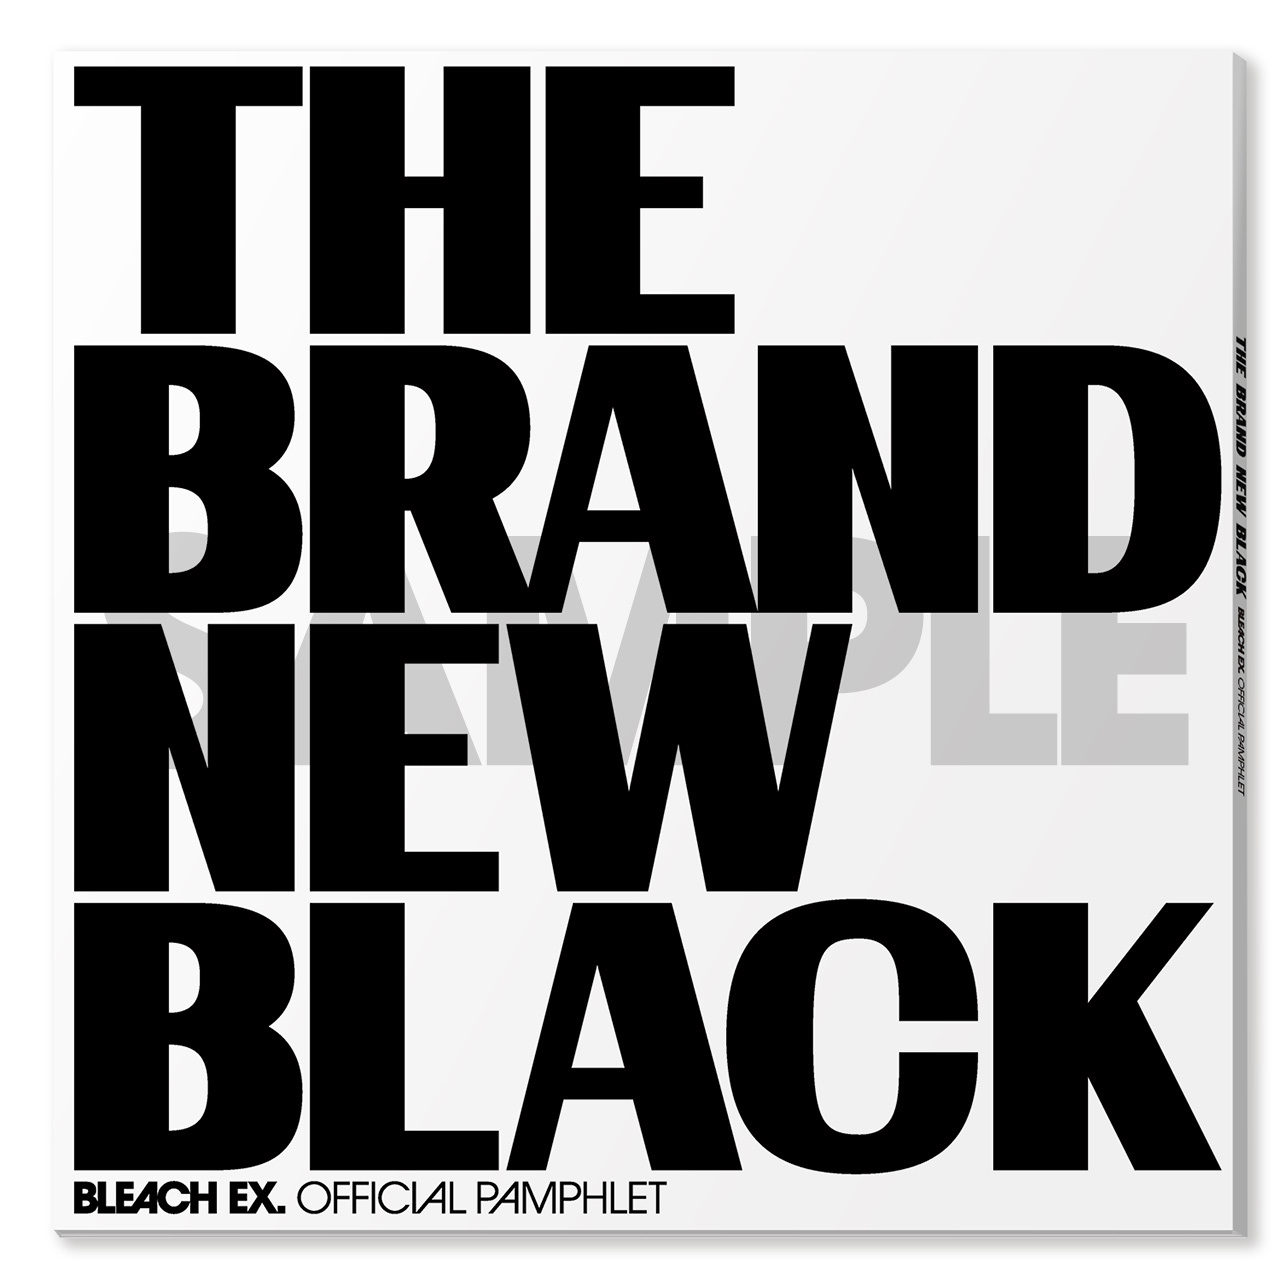 BLEACH EX. / 公式パンフレット「THE BRAND NEW BLACK」